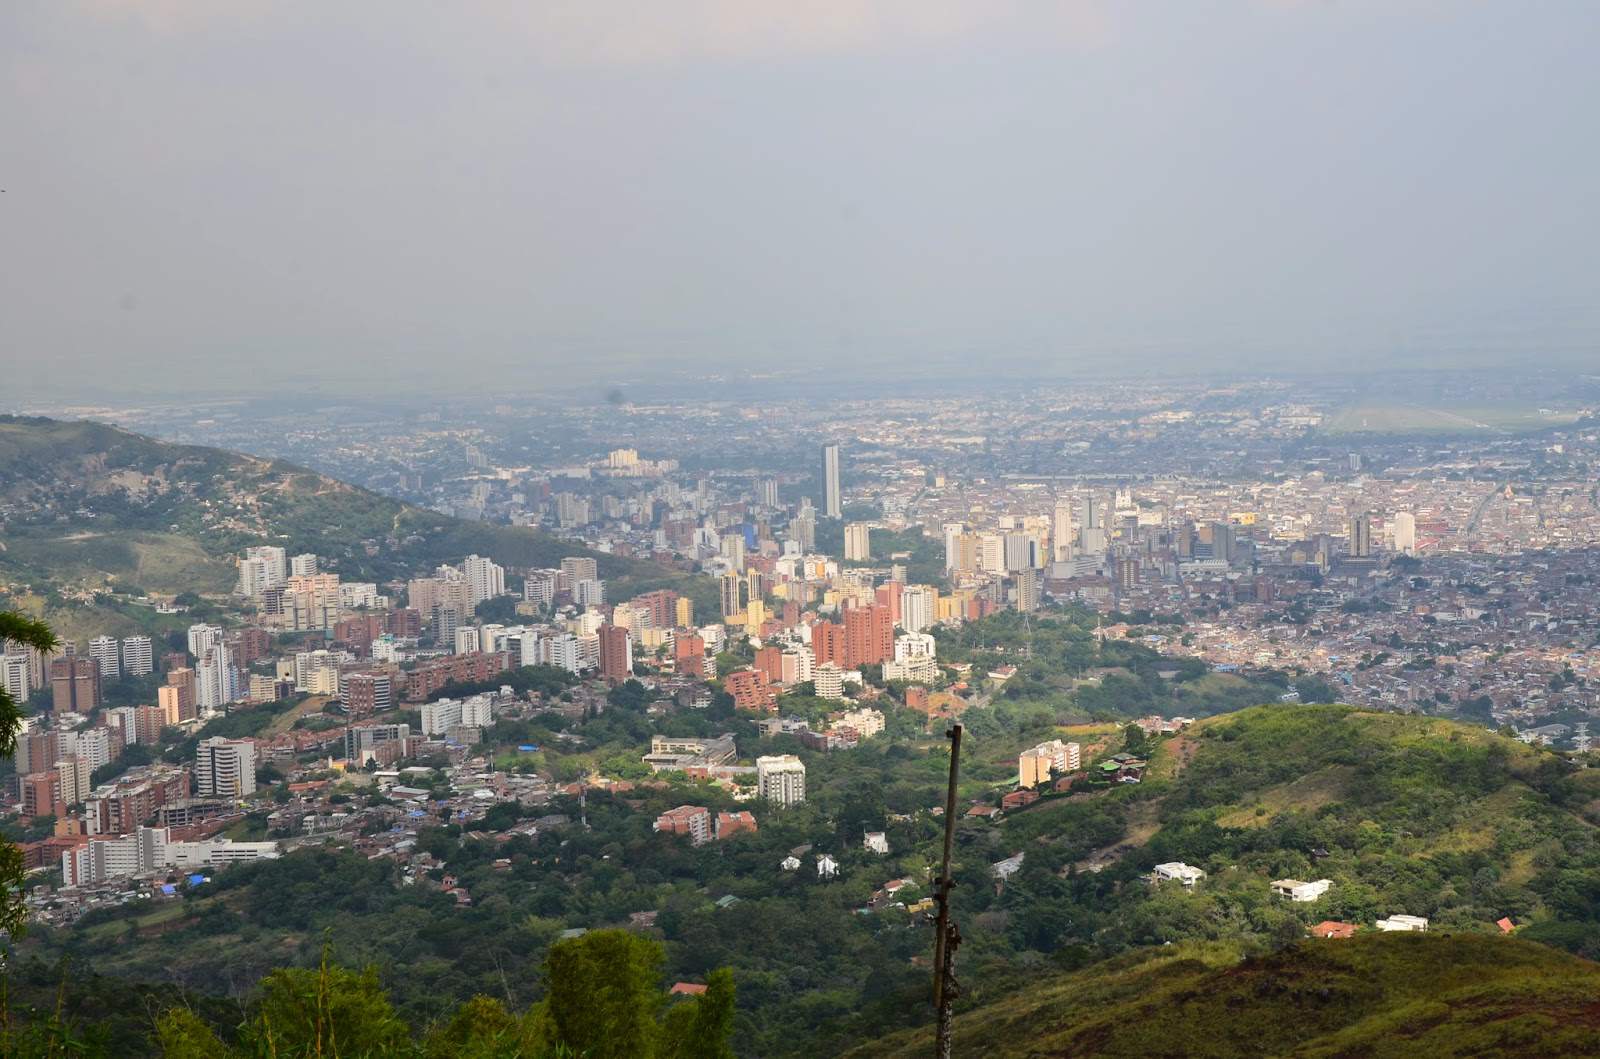 View of Cali from Cristo Rey in Cali, Colombia